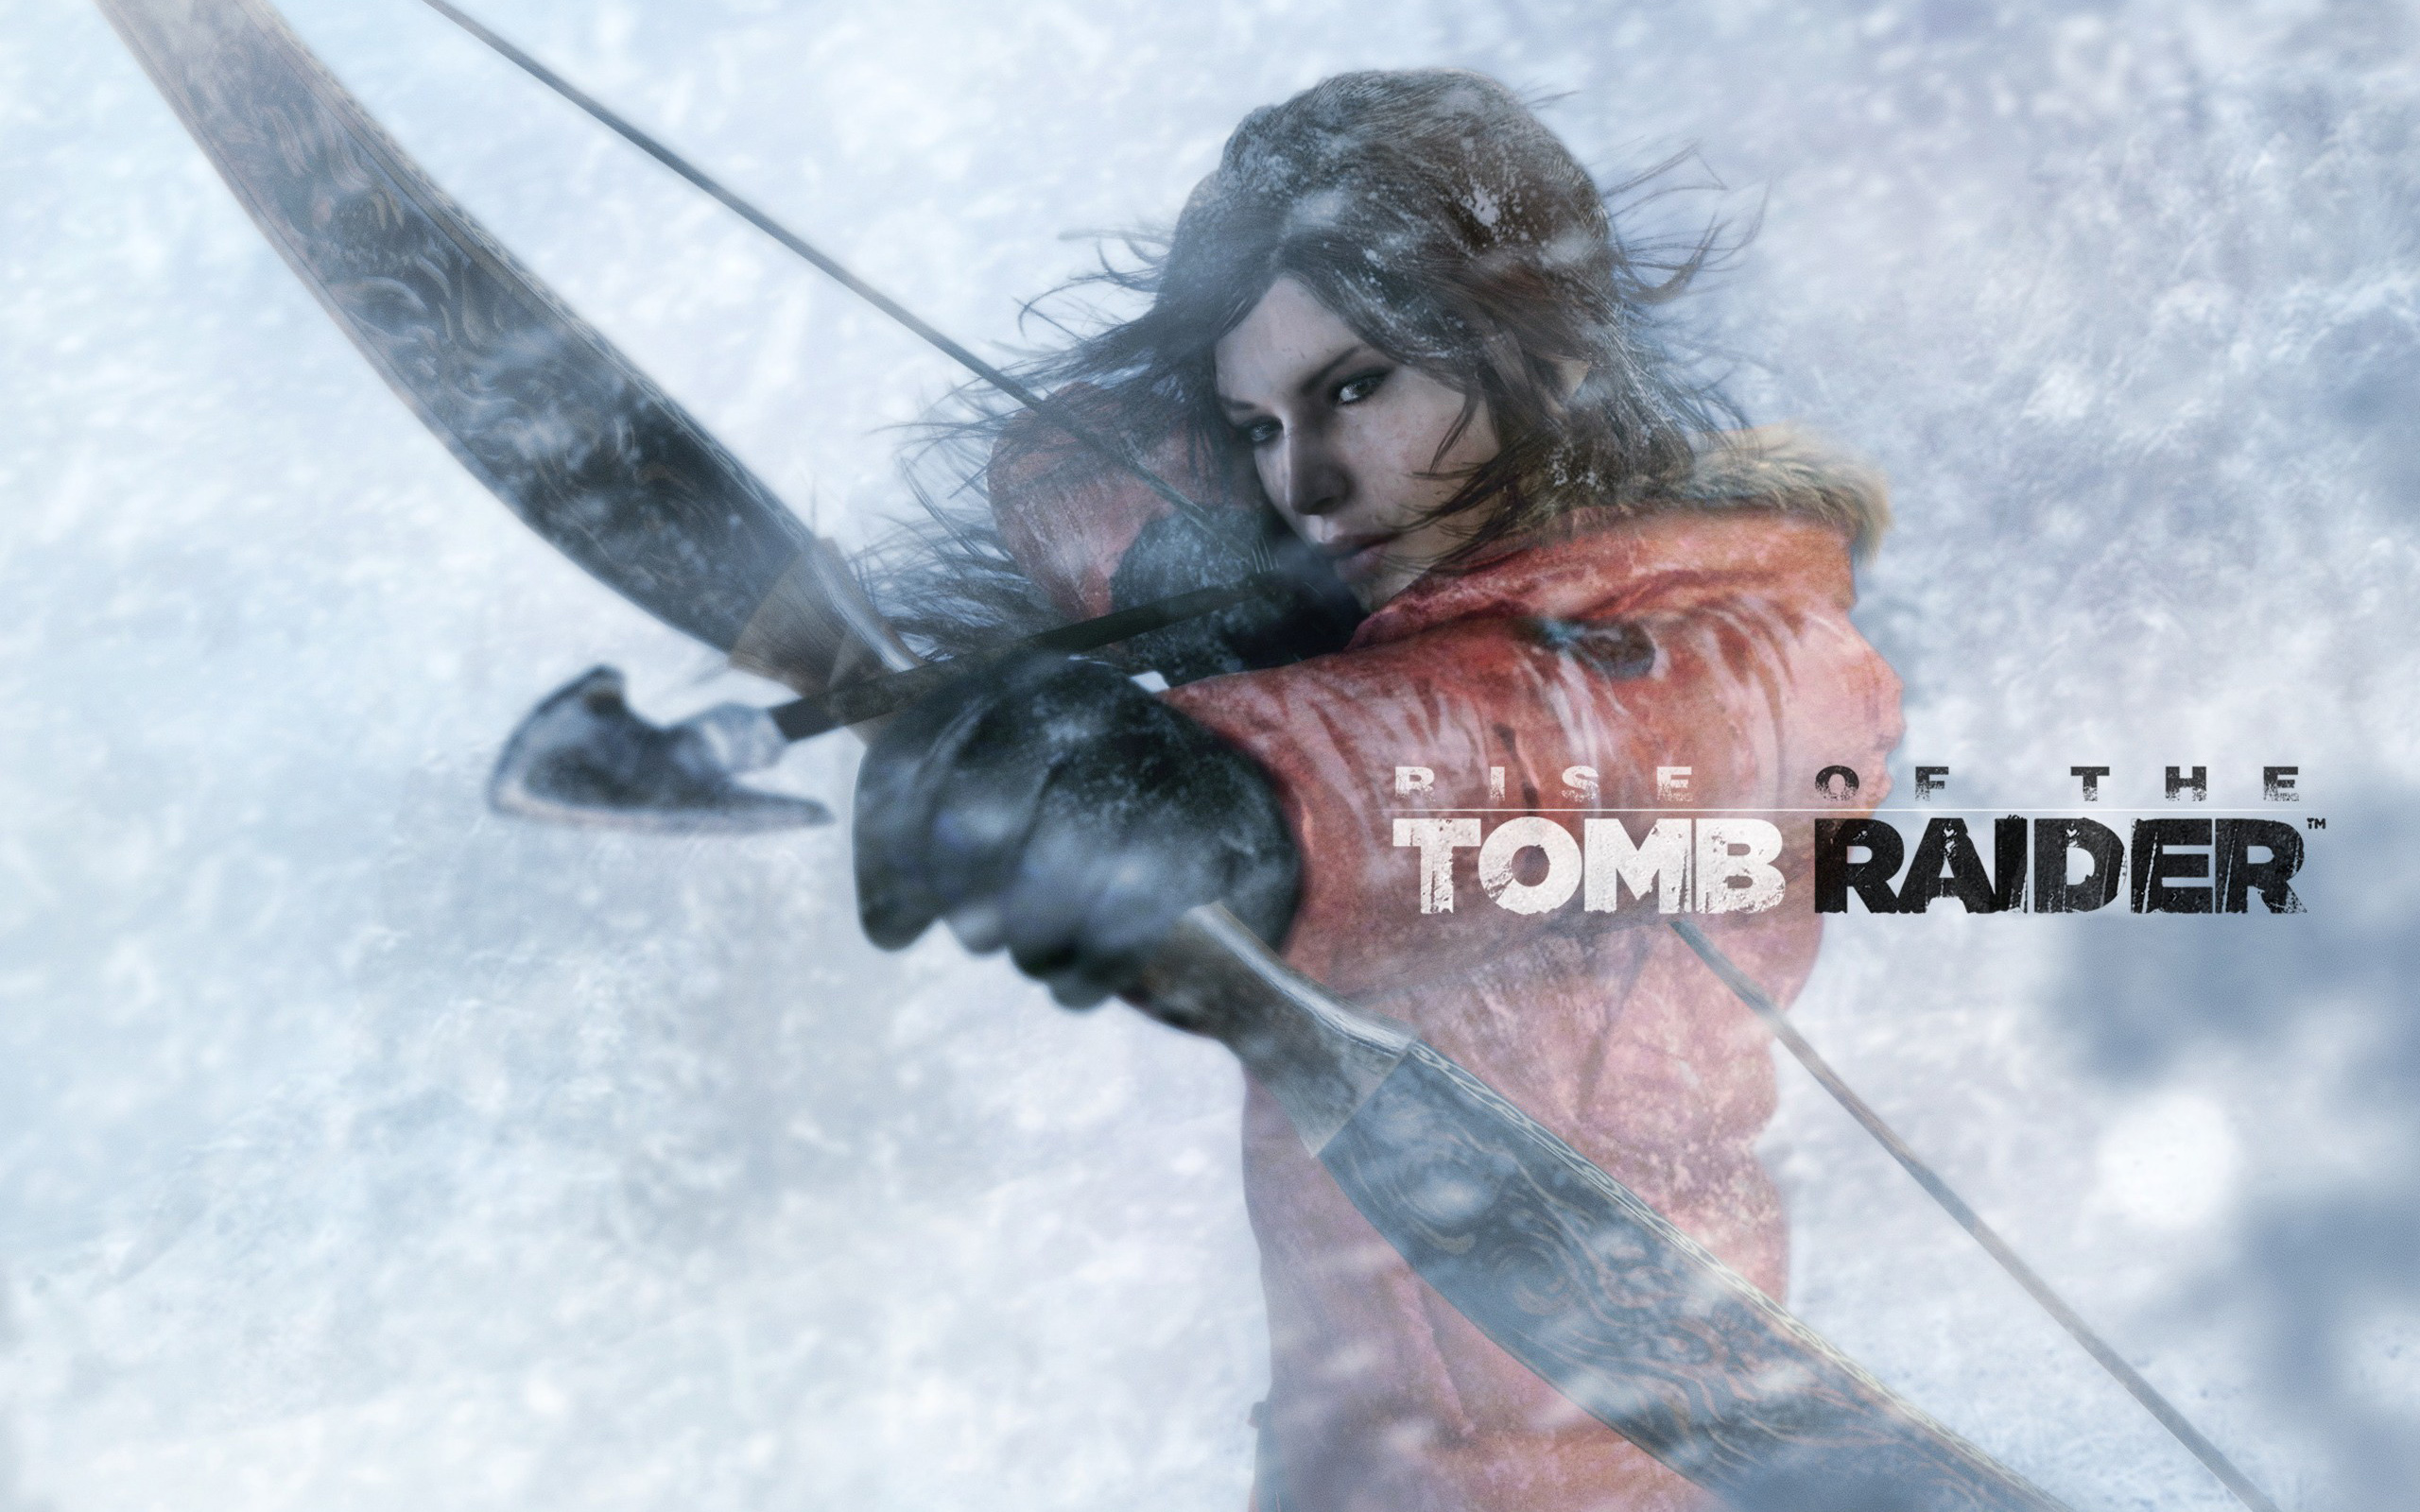 tomb raider, rise of the tomb raider, video game